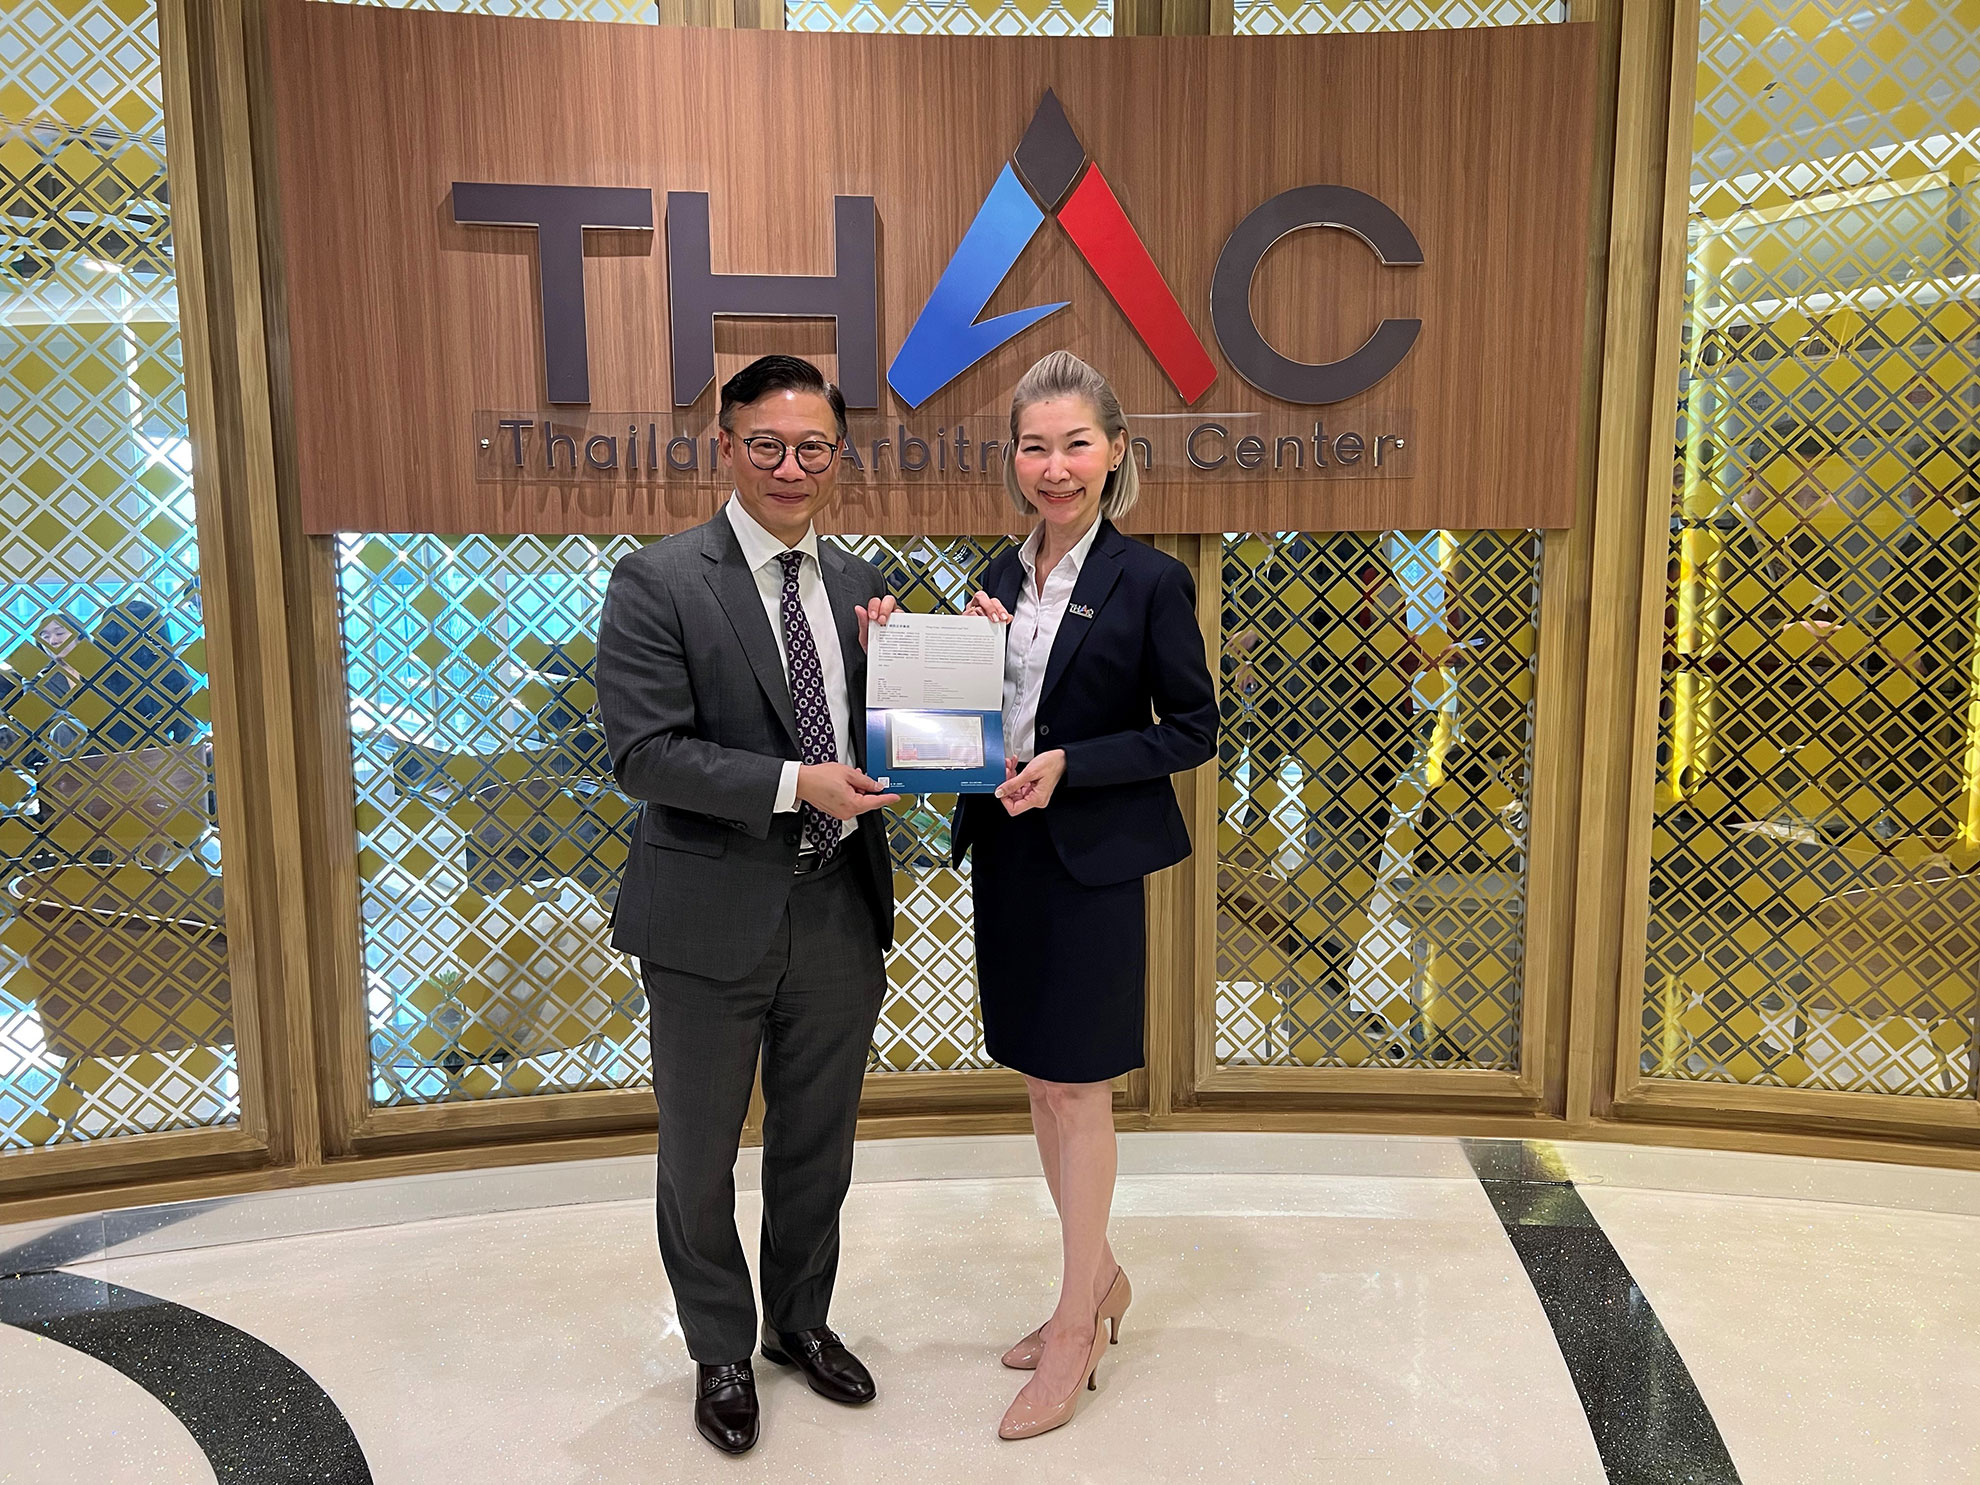 The Deputy Secretary for Justice, Mr Cheung Kwok-kwan (left), met with the Acting Managing Director of the Thailand Arbitration Center, Ms Machimdhorn Khampiranont (right), and exchanged souvenirs in Bangkok, Thailand, today (March 16).